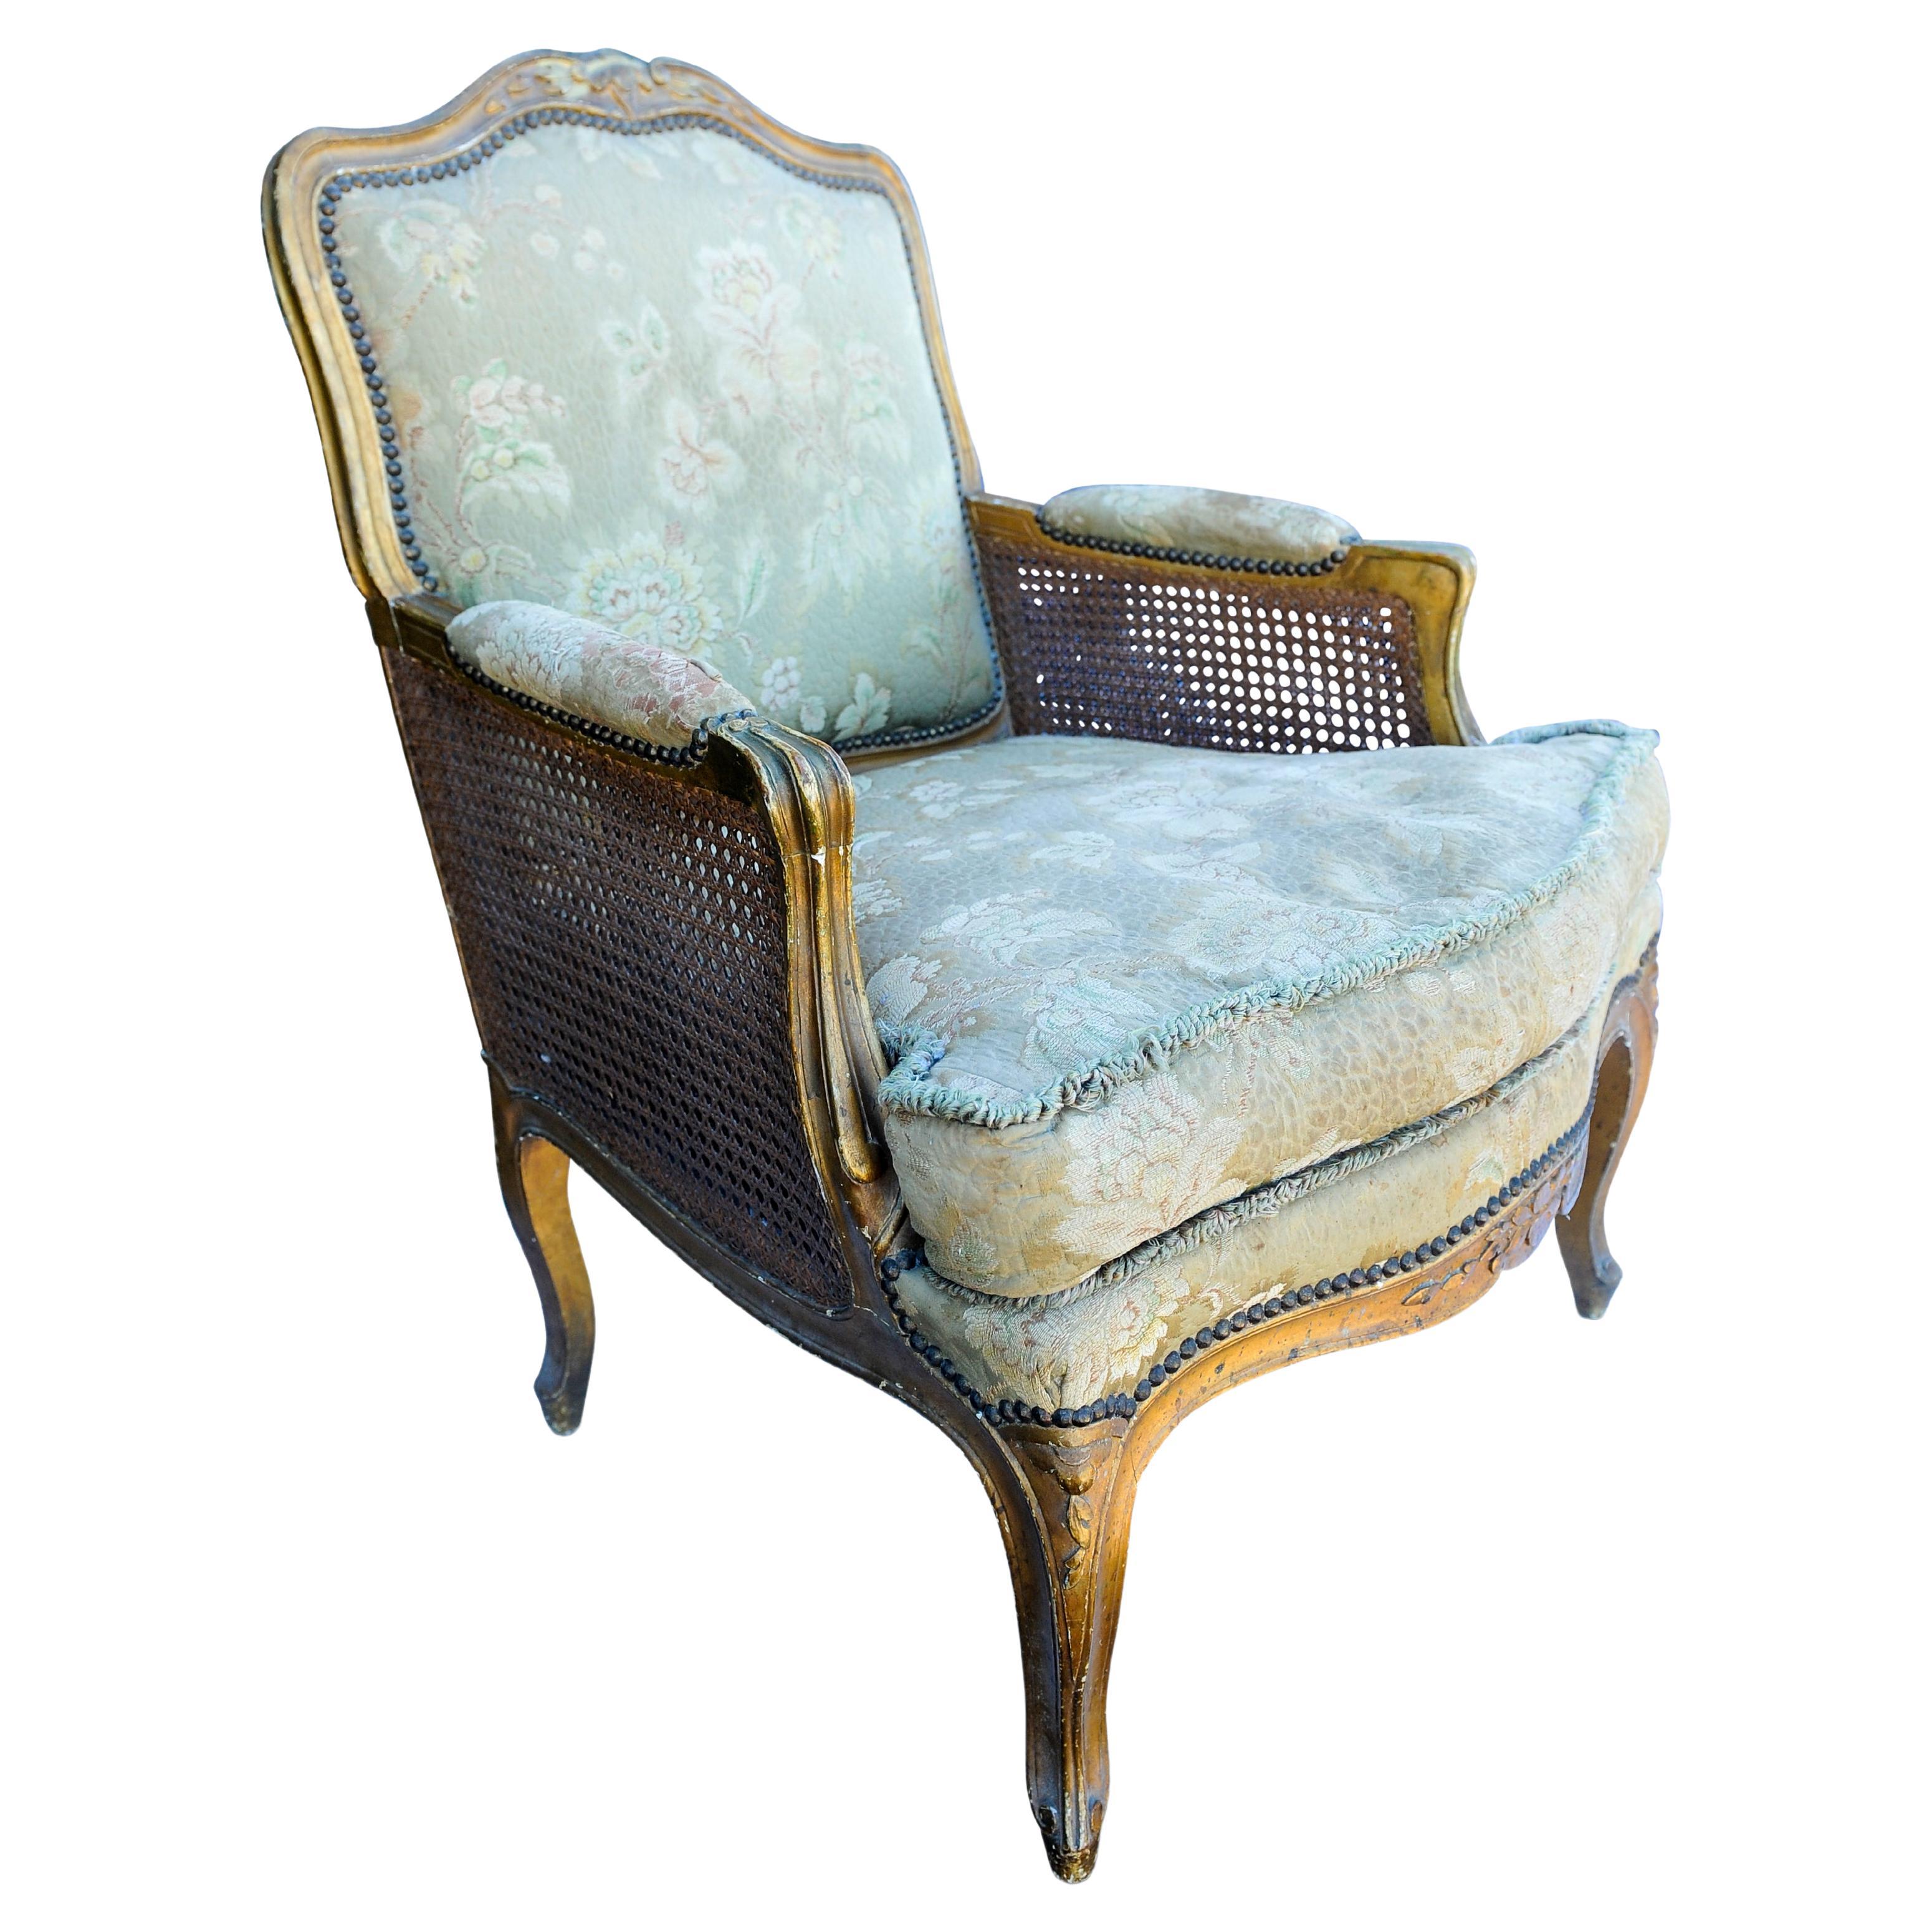 Antique 19th Century French Gilded Bergere Armchair with Stud Detailing For Sale